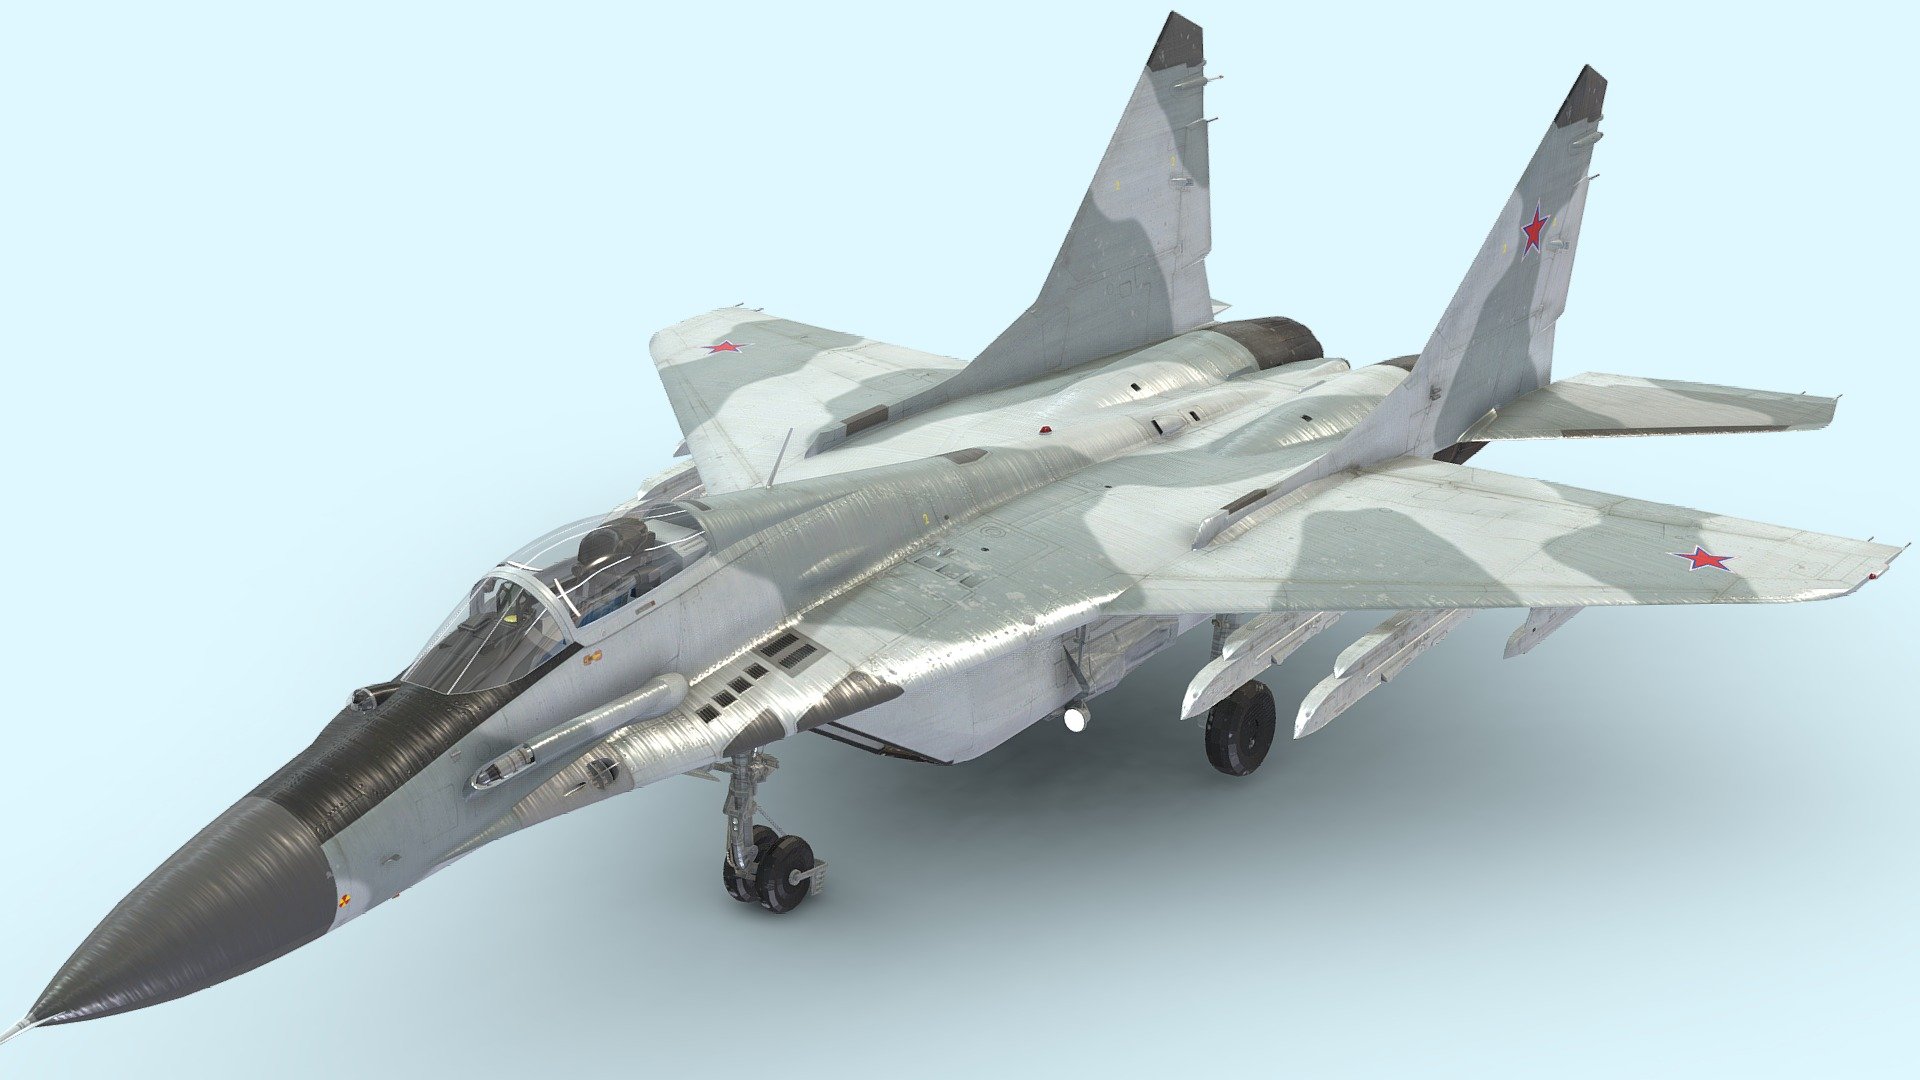 The Mikoyan MiG-29 (NATO reporting name: Fulcrum) is a twin-engine fighter aircraft designed in the Soviet Union. Developed by the Mikoyan design bureau as an air superiority fighter during the 1970s, the MiG-29, along with the larger Sukhoi Su-27, was developed to counter new U.S. fighters such as the McDonnell Douglas F-15 Eagle and the General Dynamics F-16 Fighting Falcon. The MiG-29 entered service with the Soviet Air Forces in 1983.

While originally oriented towards combat against any enemy aircraft, many MiG-29s have been furnished as multirole fighters capable of performing a number of different operations, and are commonly outfitted to use a range of air-to-surface armaments and precision munitions.

Following the dissolution of the Soviet Union, the militaries of multiple ex-Soviet republics have continued to operate the MiG-29.  The MiG-29 has also been a popular export aircraft; more than 30 nations either operate or have operated the aircraft to date 3d model